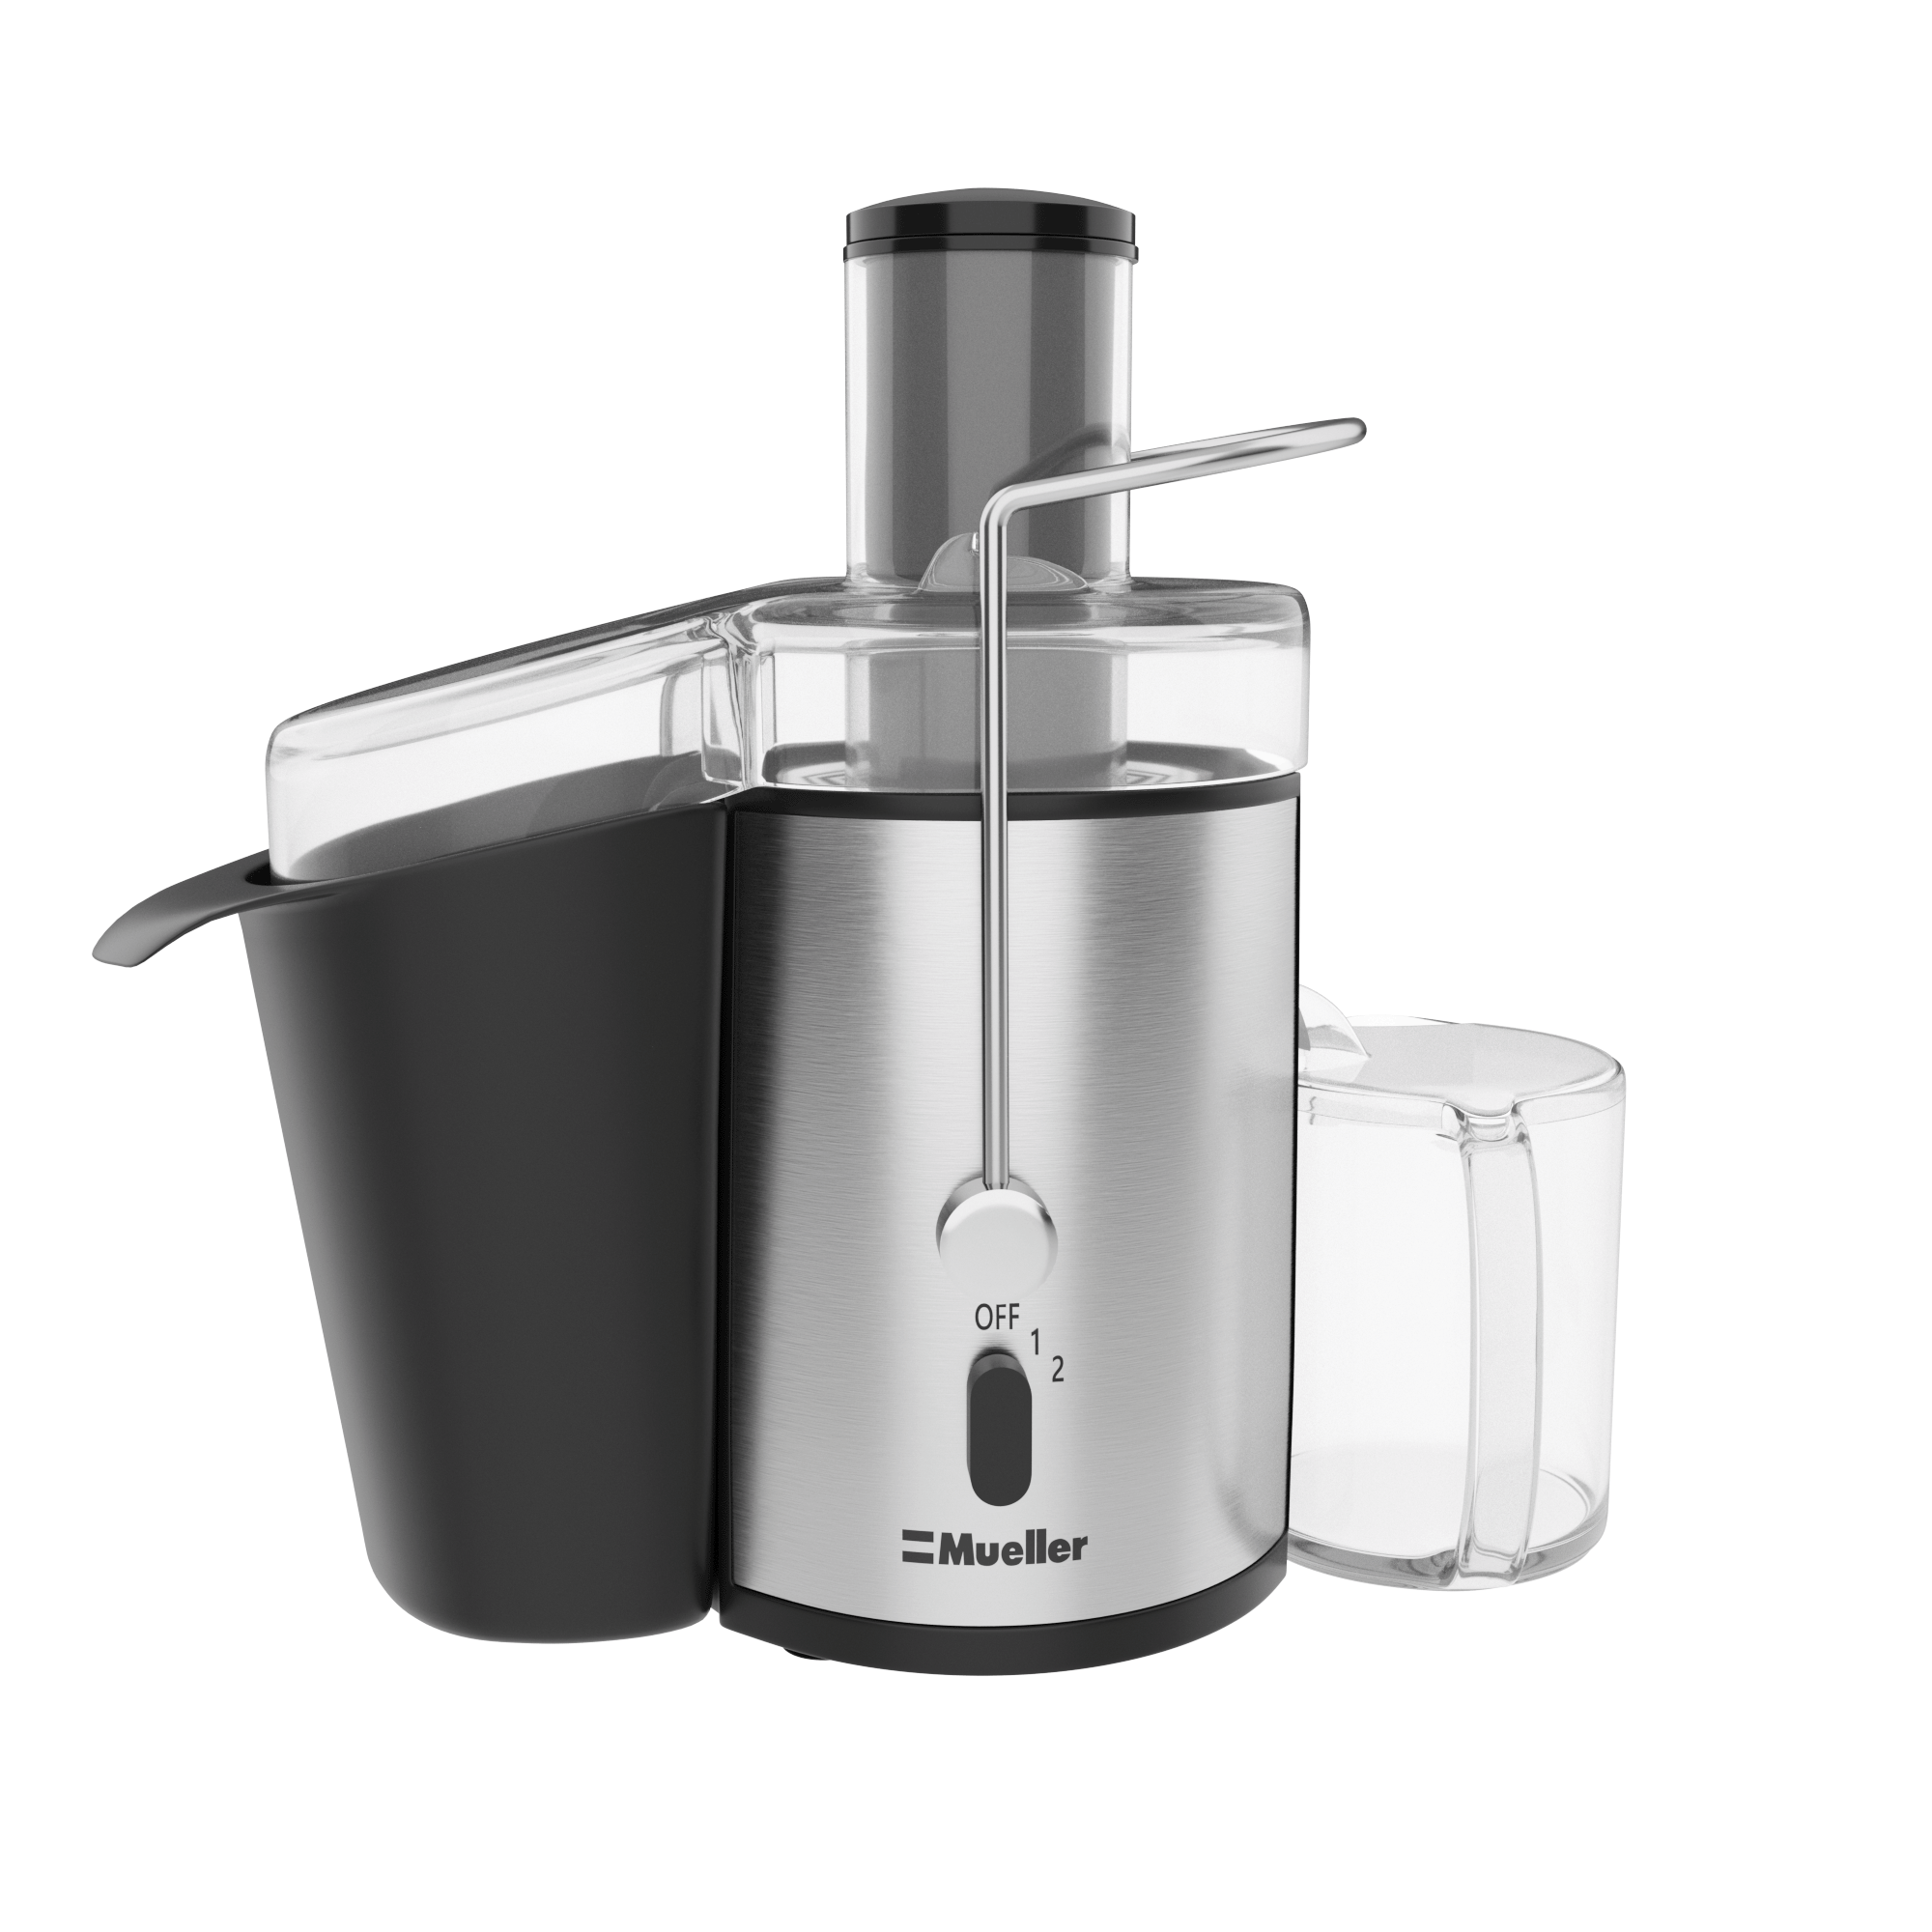 Mueller Austria Juicer Ultra 1100W Power, Easy Clean Extractor Press  Centrifugal Juicing Machine, Wide 3” Feed Chute for Whole Fruit Vegetable,  Anti-drip, High Quality, BPA-Free, Large, Silver